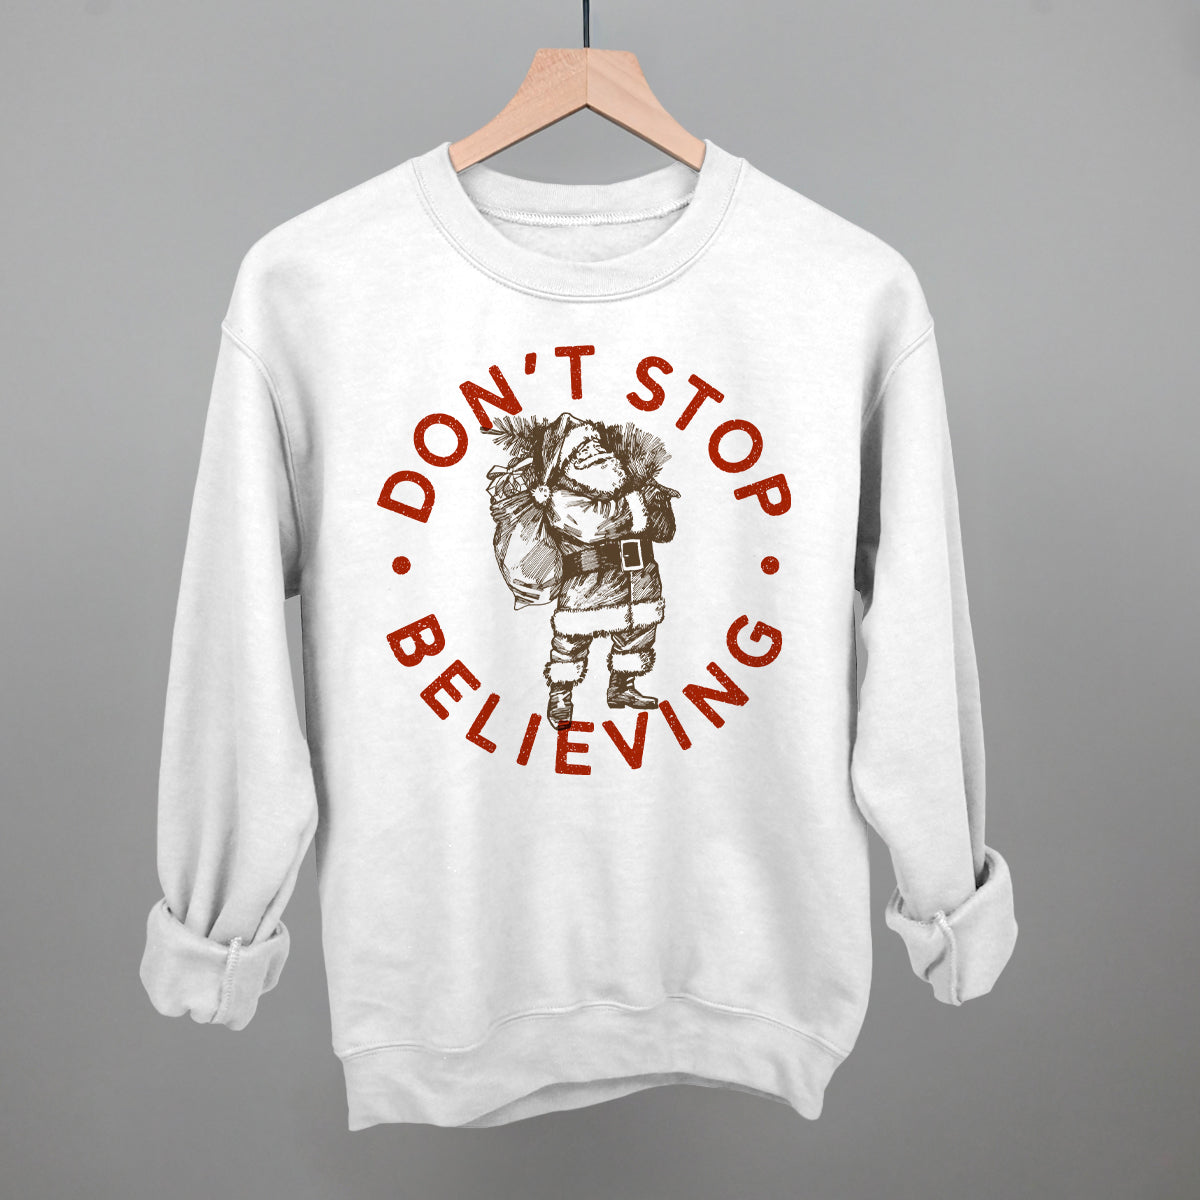 Don't Stop Believing